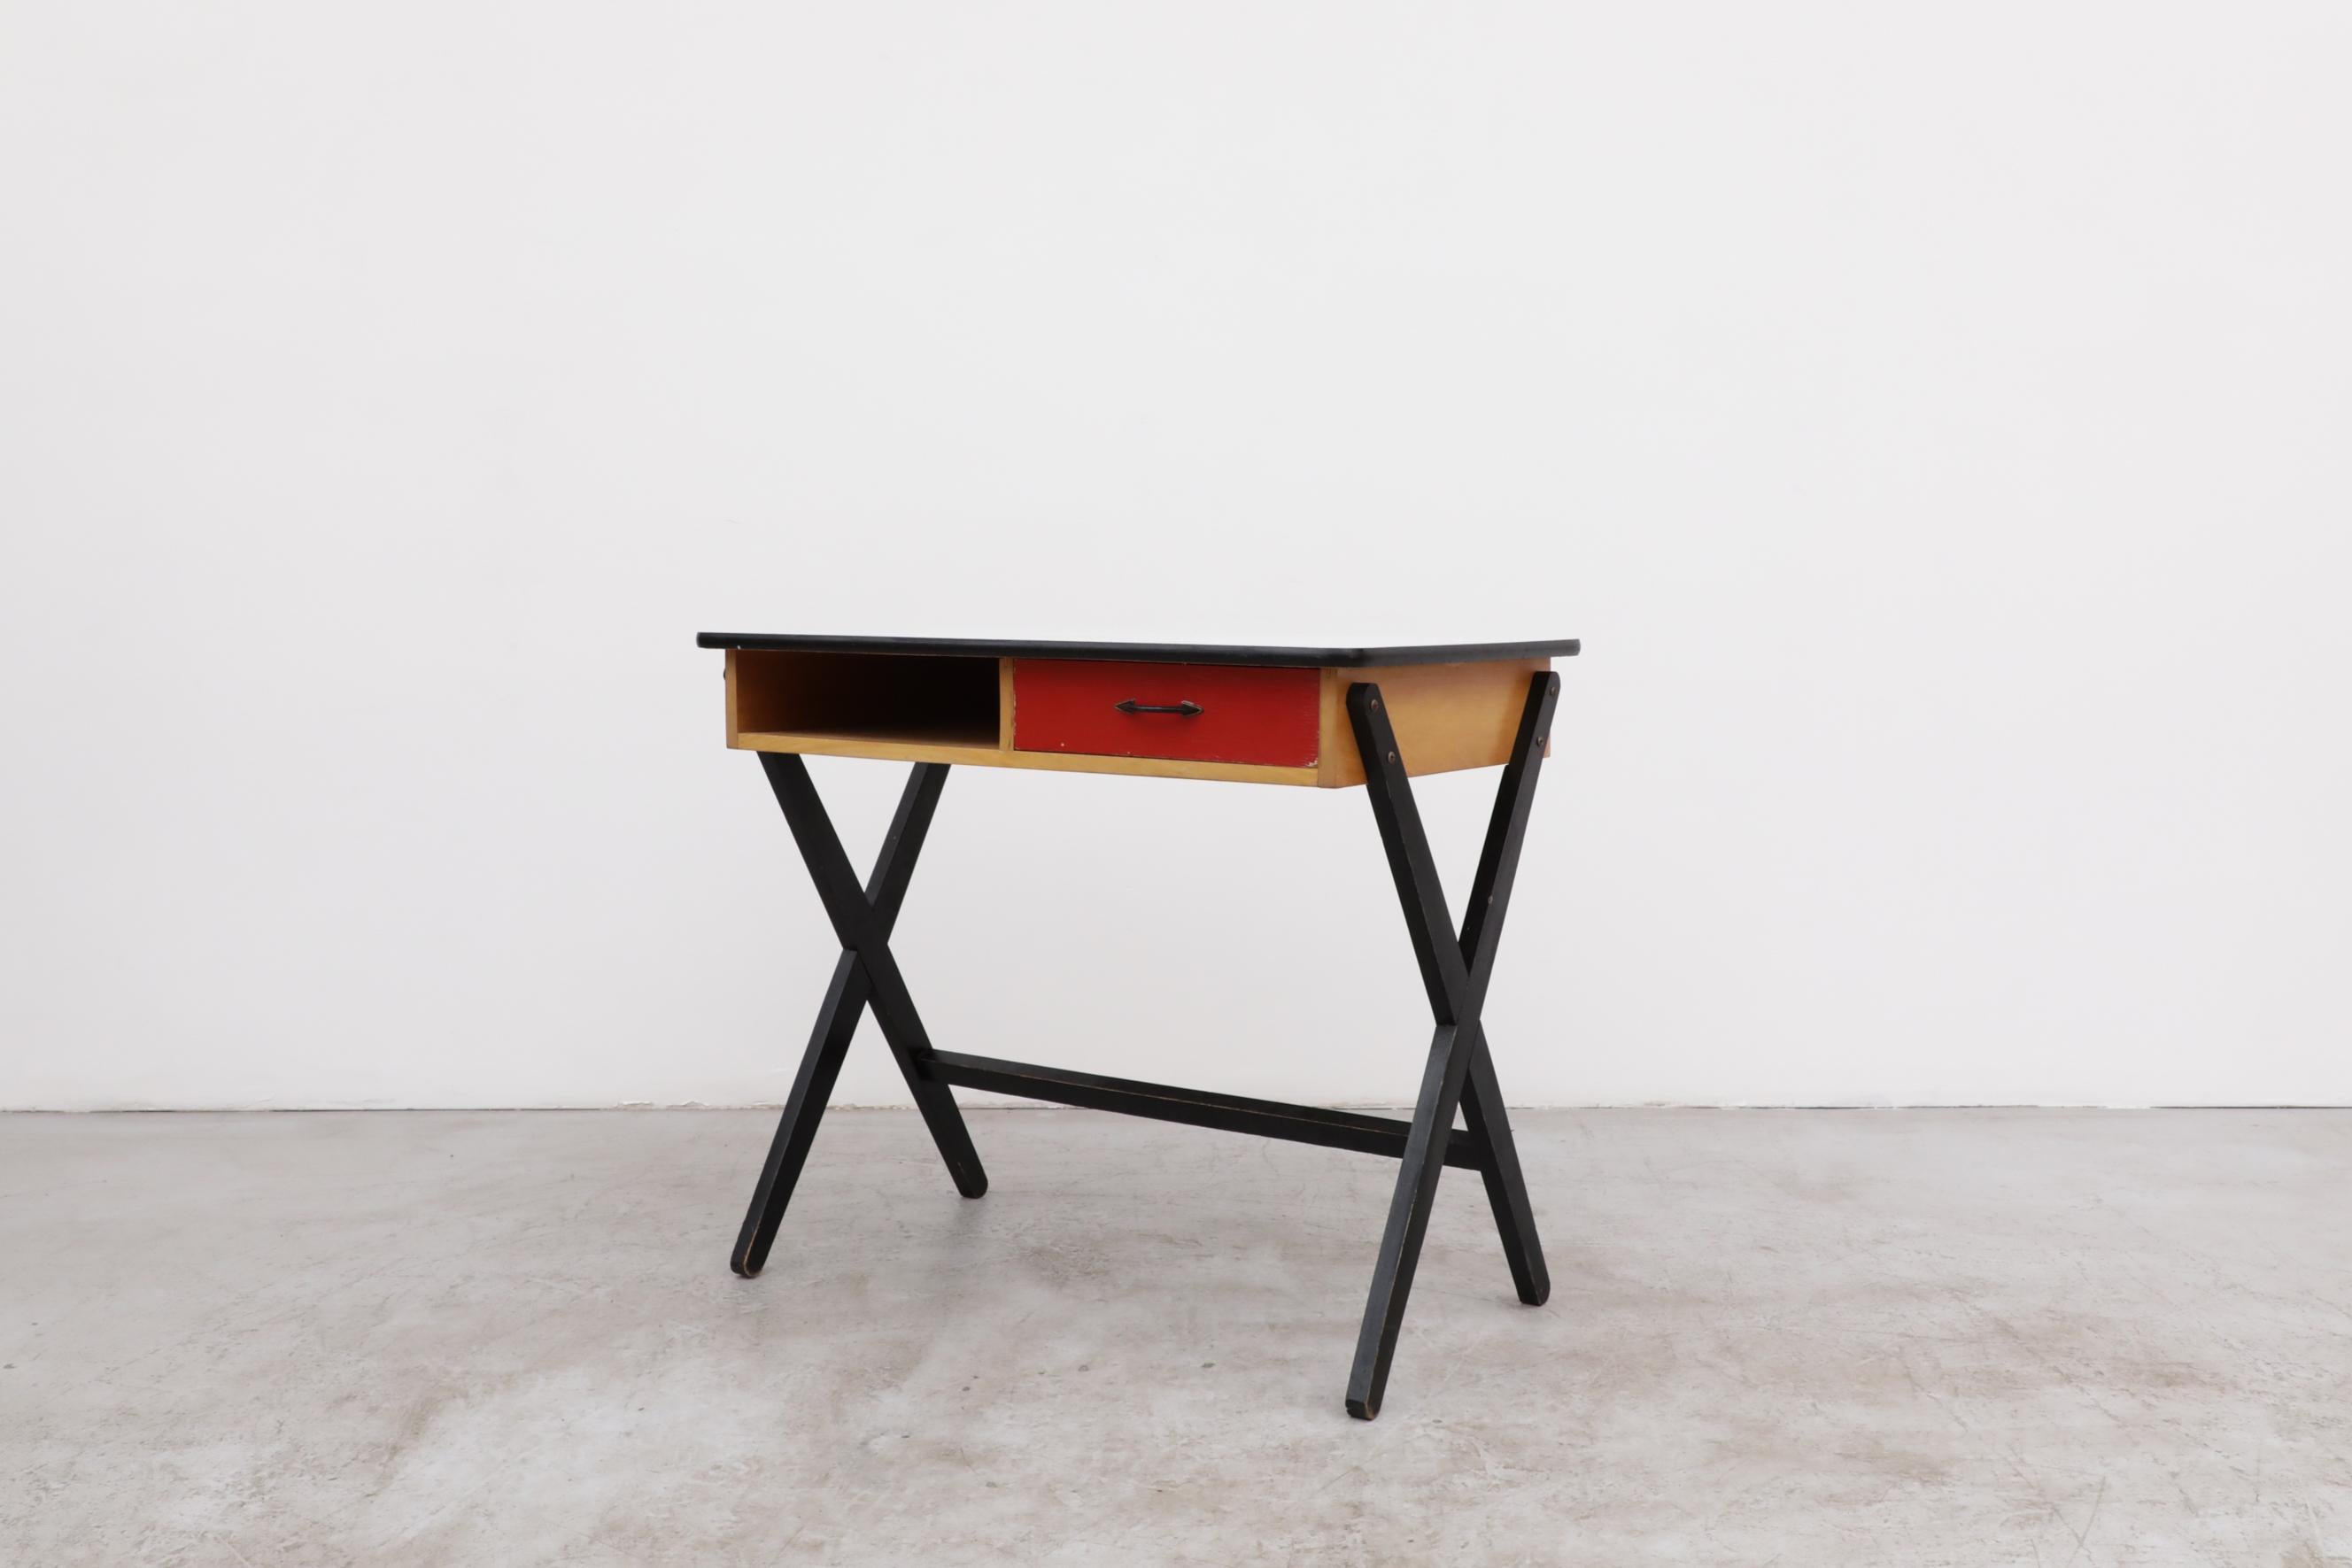 1954 Coen de Vries Desk in Birch w/ Ebony Base, Red Drawer and Formica Top In Good Condition For Sale In Los Angeles, CA